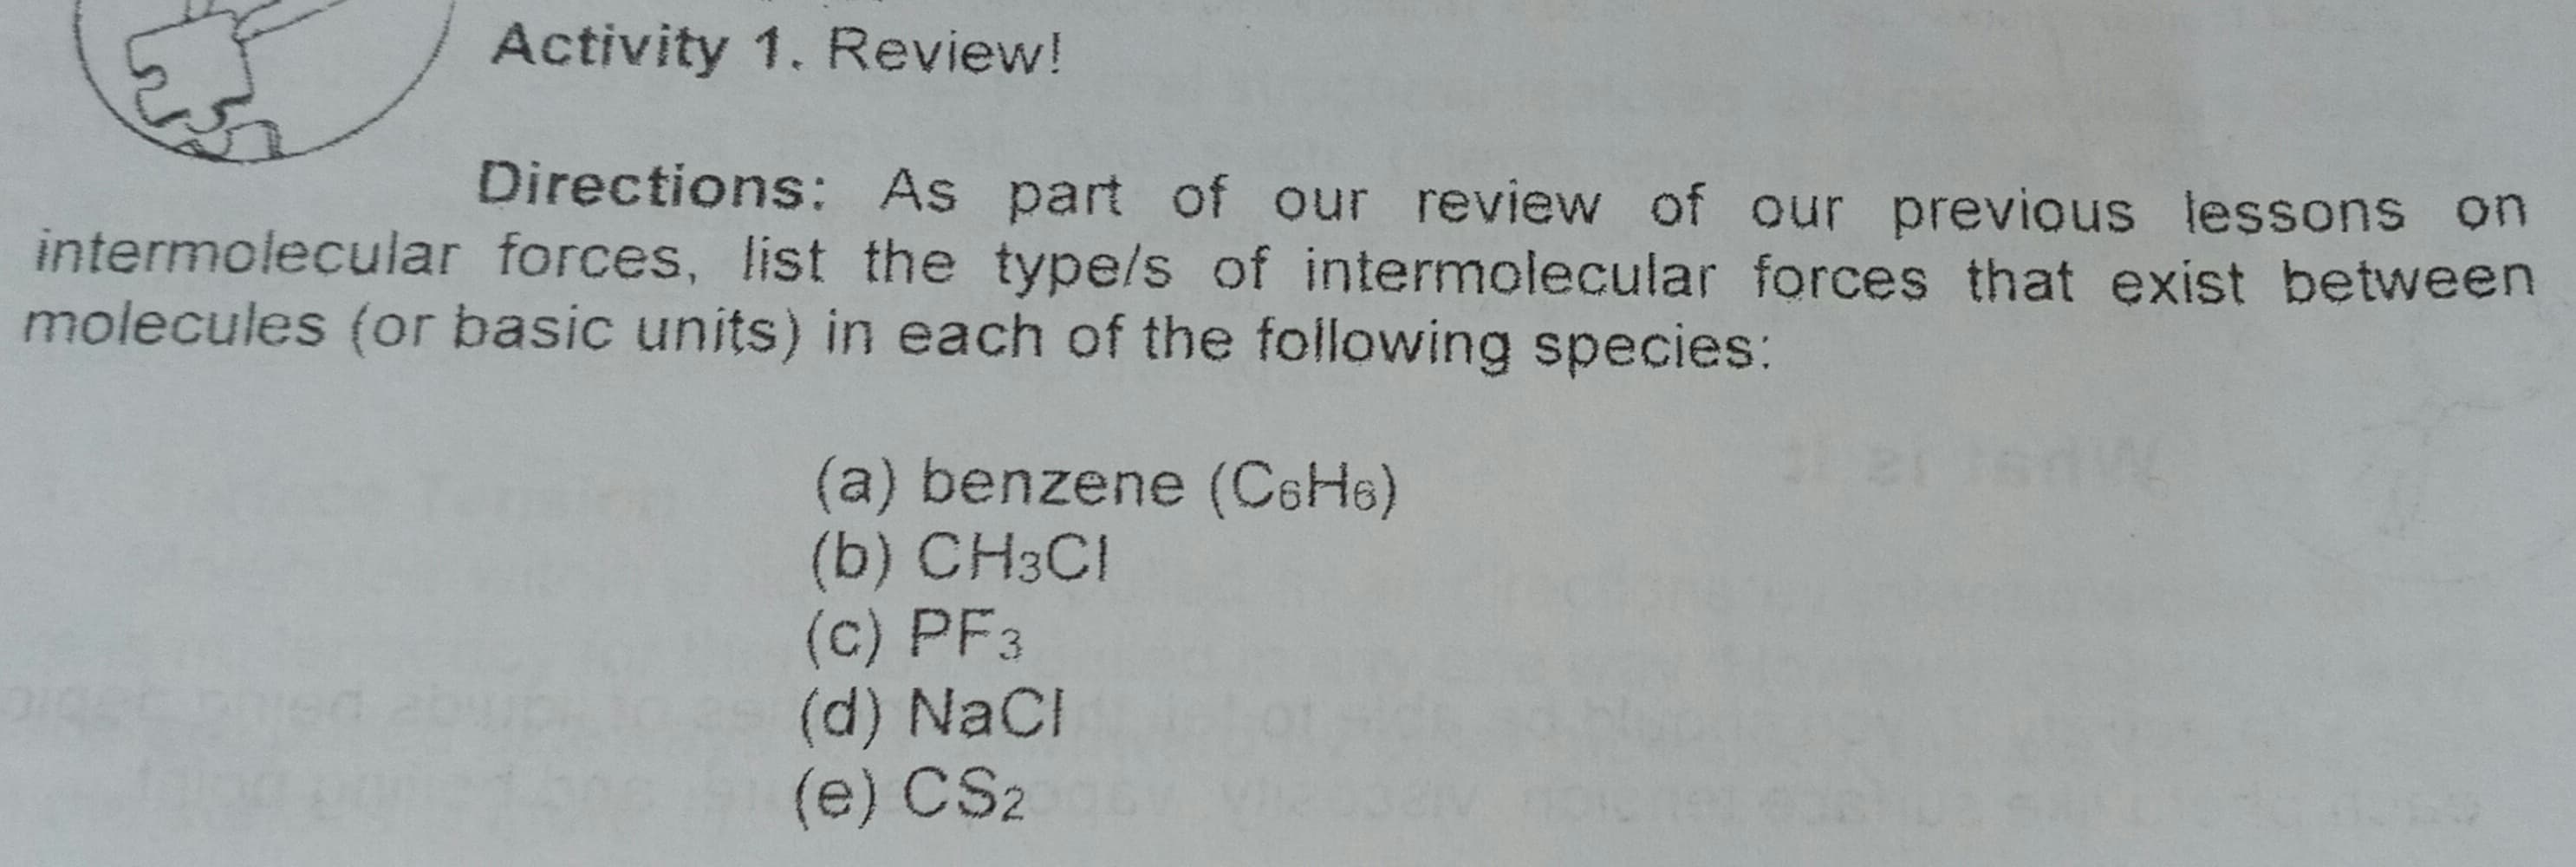 Directions: As part of our review of our previous lessons on
intermolecular forces, list the type/s of intermolecular forces that exist between
molecules (or basic units) in each of the following species:
(a) benzene (CSH6)
(b) CH3CI
(c) PF3
(d) NaCl
(e) CS2
